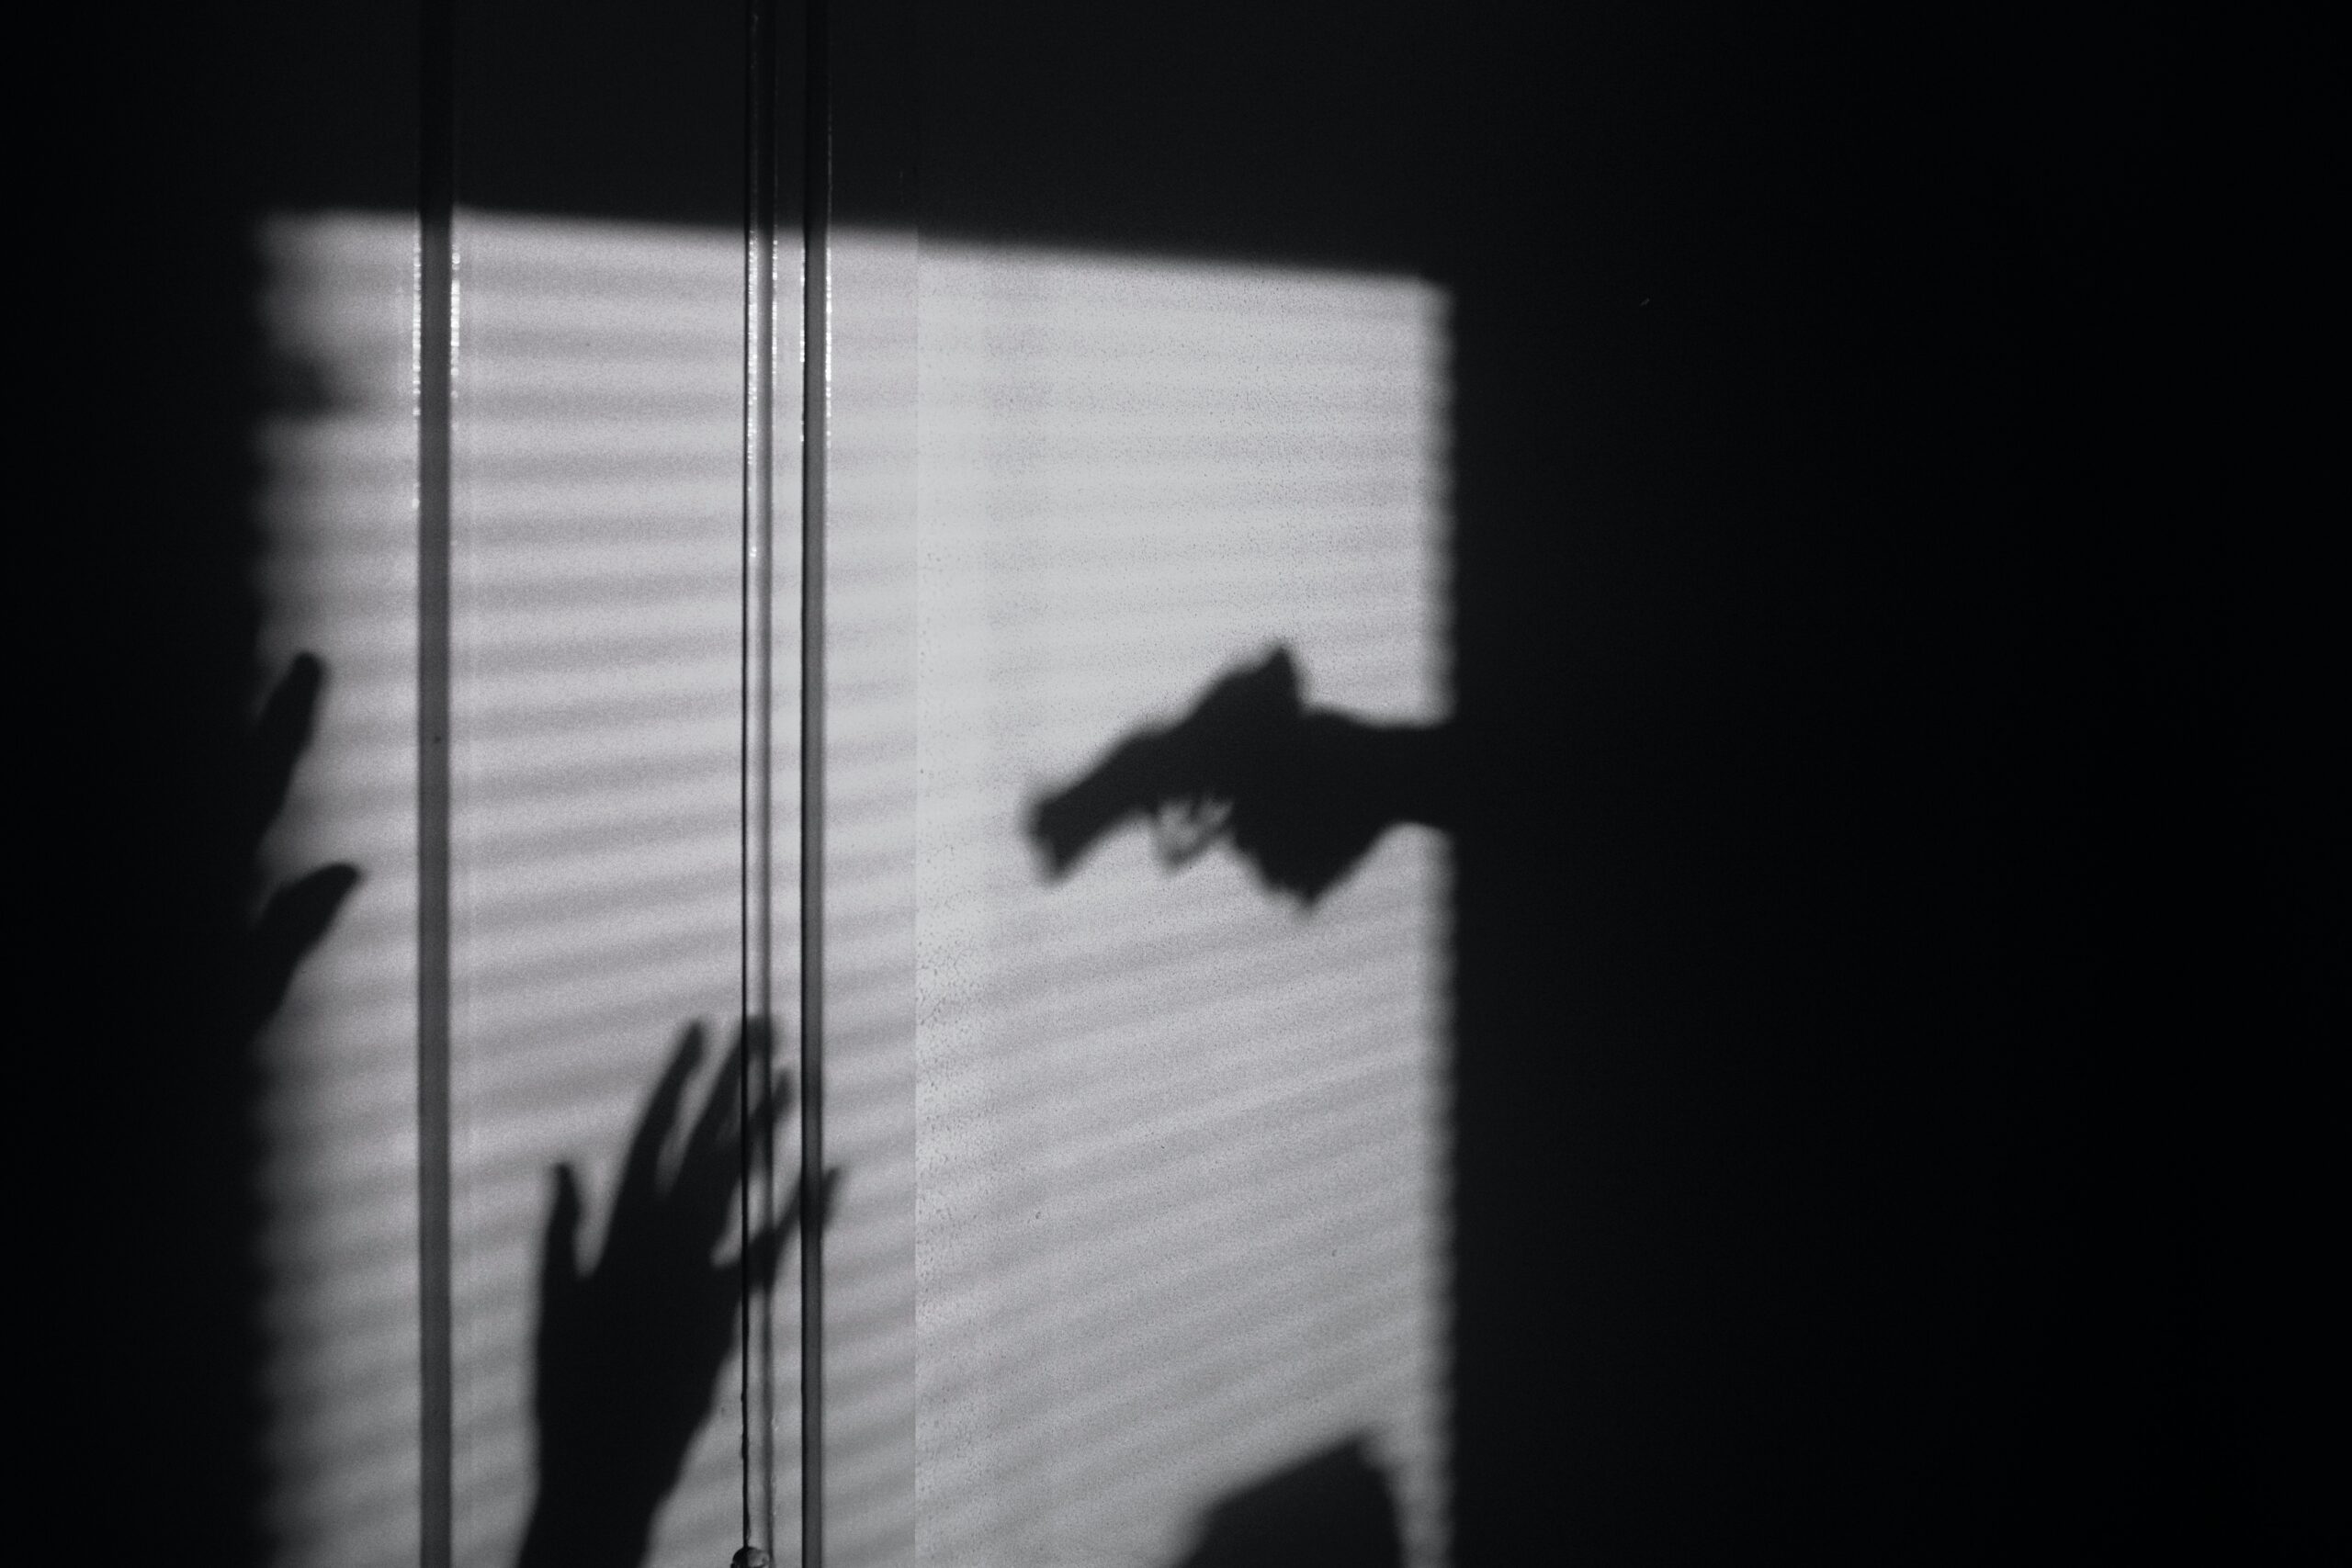 shadowed silhouette of someone held at gunpoint